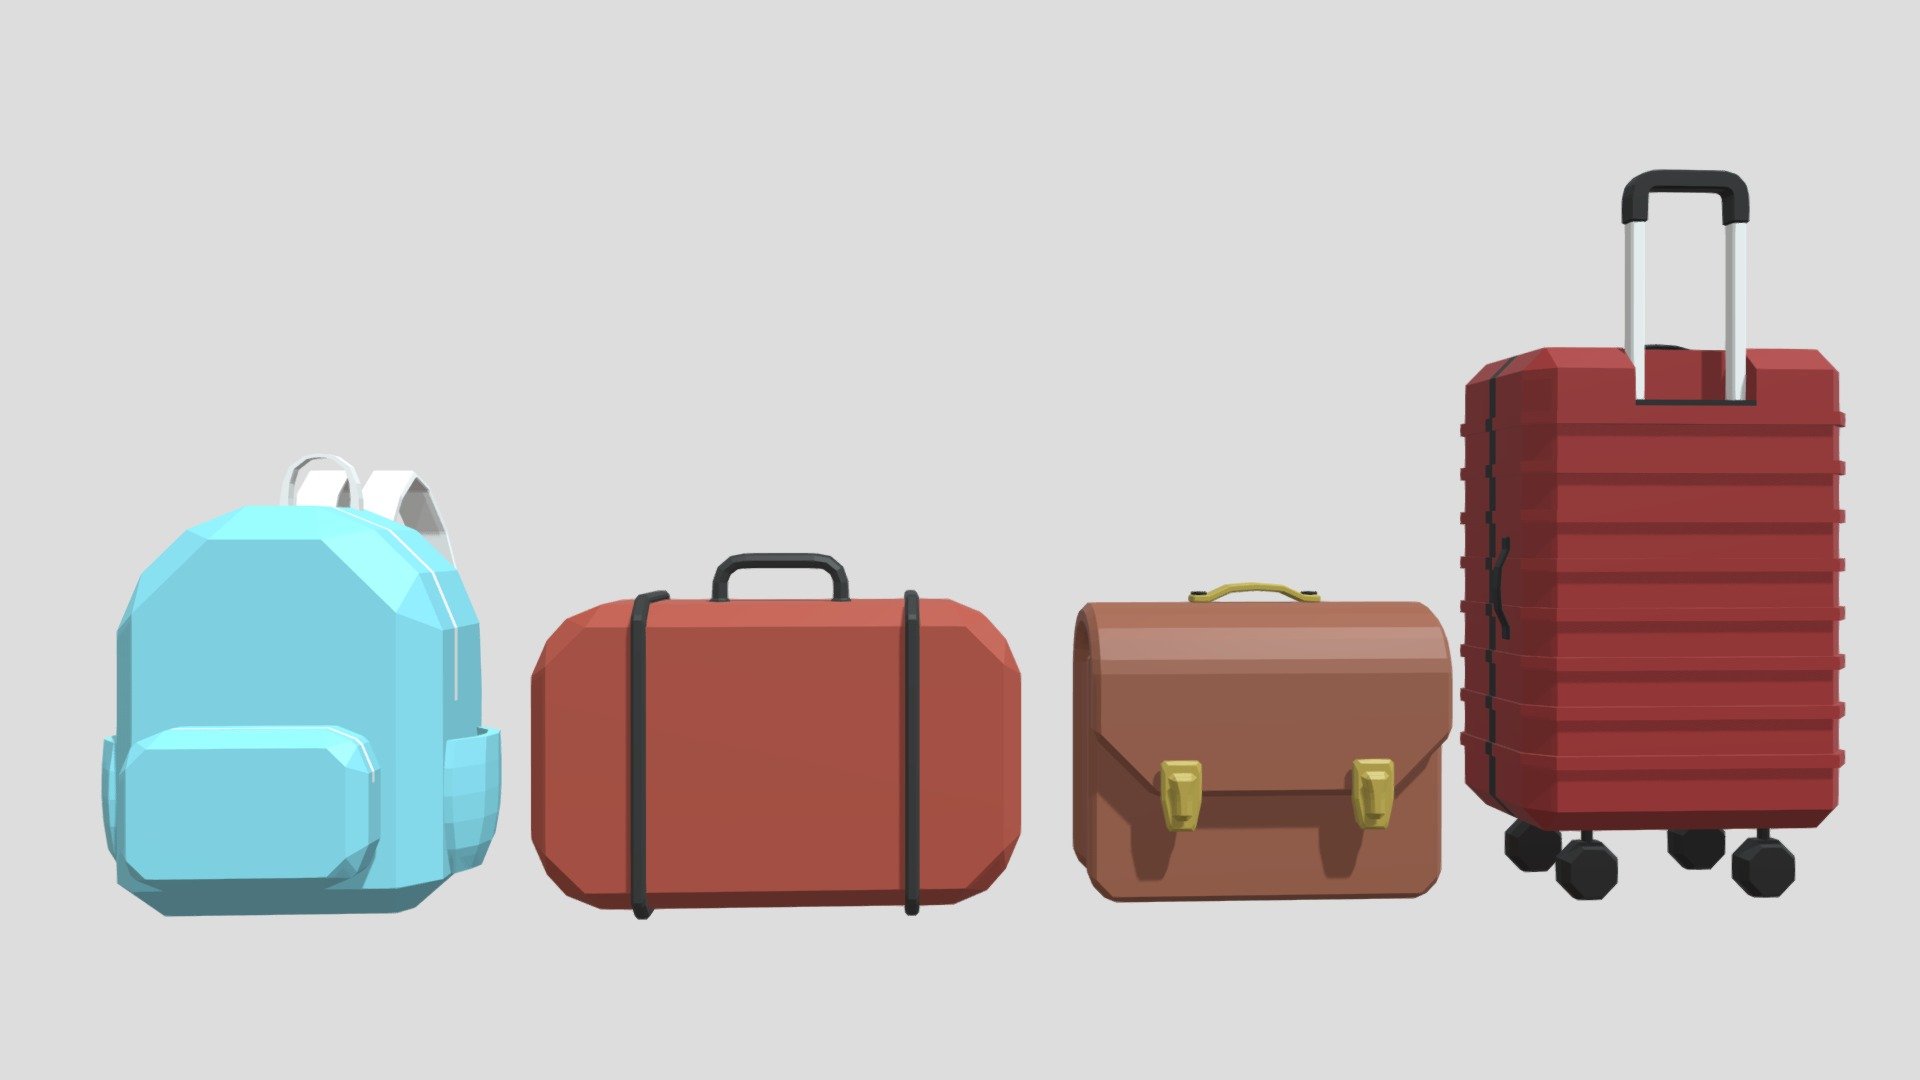 -Cartoon Lowpoly Bag Collection.

-This product contains 30 objects.

-Total vert: 2,894 poly: 2,831.

-This product was created in Blender 3.0.

-Formats: blend, fbx, obj, c4d, dae, abc, glb, stl, unity.

-We hope you enjoy this model.

-Thank you 3d model